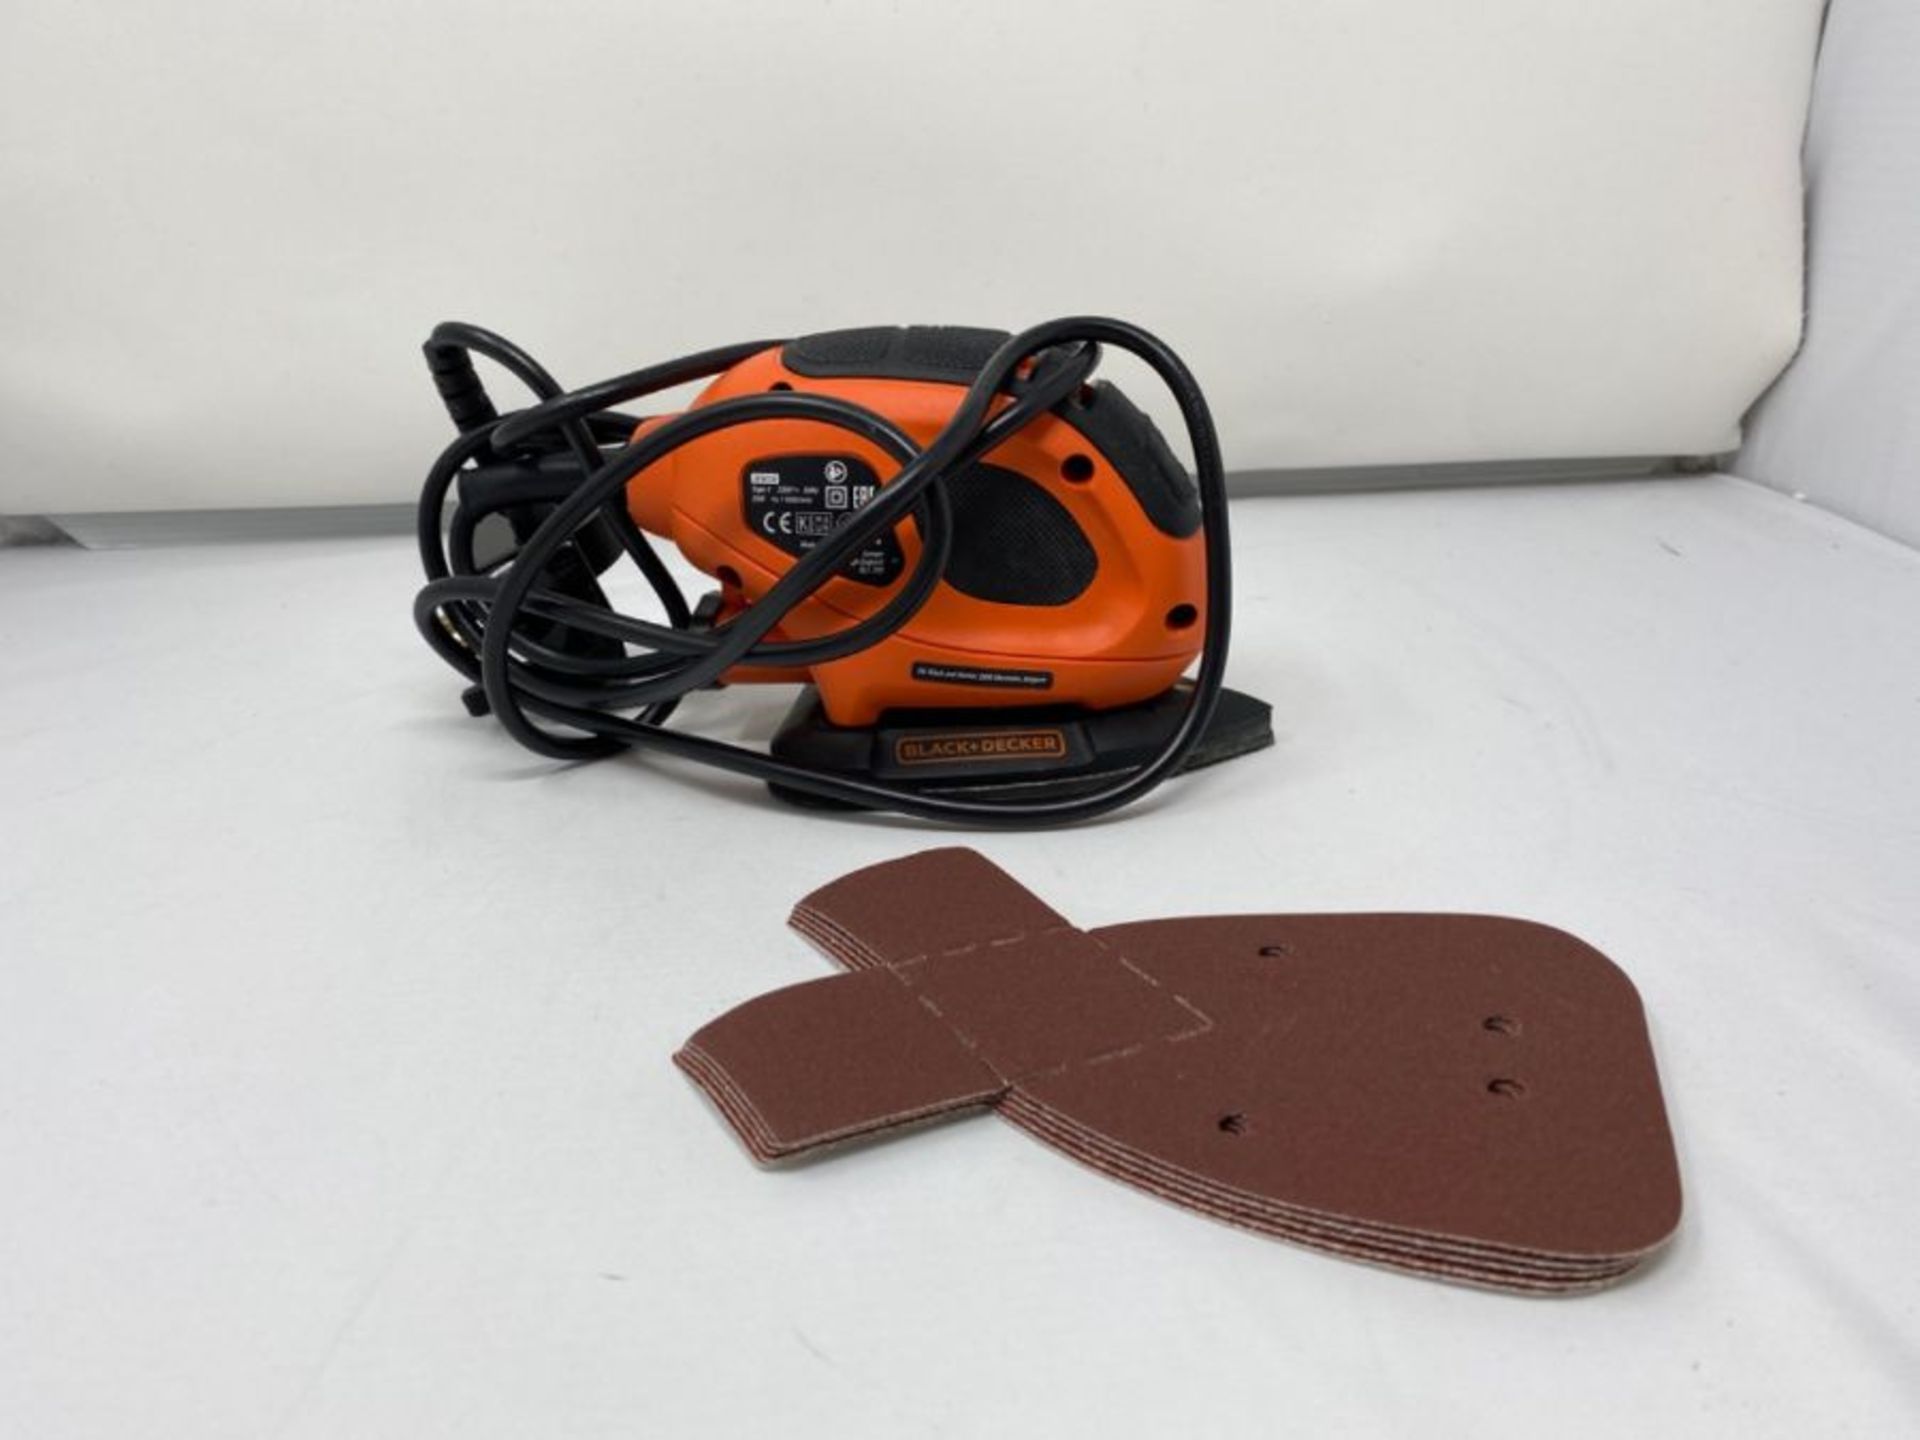 BLACK+DECKER 55 W Detail Mouse Electric Sander with 6 Sanding Sheets, BEW230-GB - Image 3 of 3